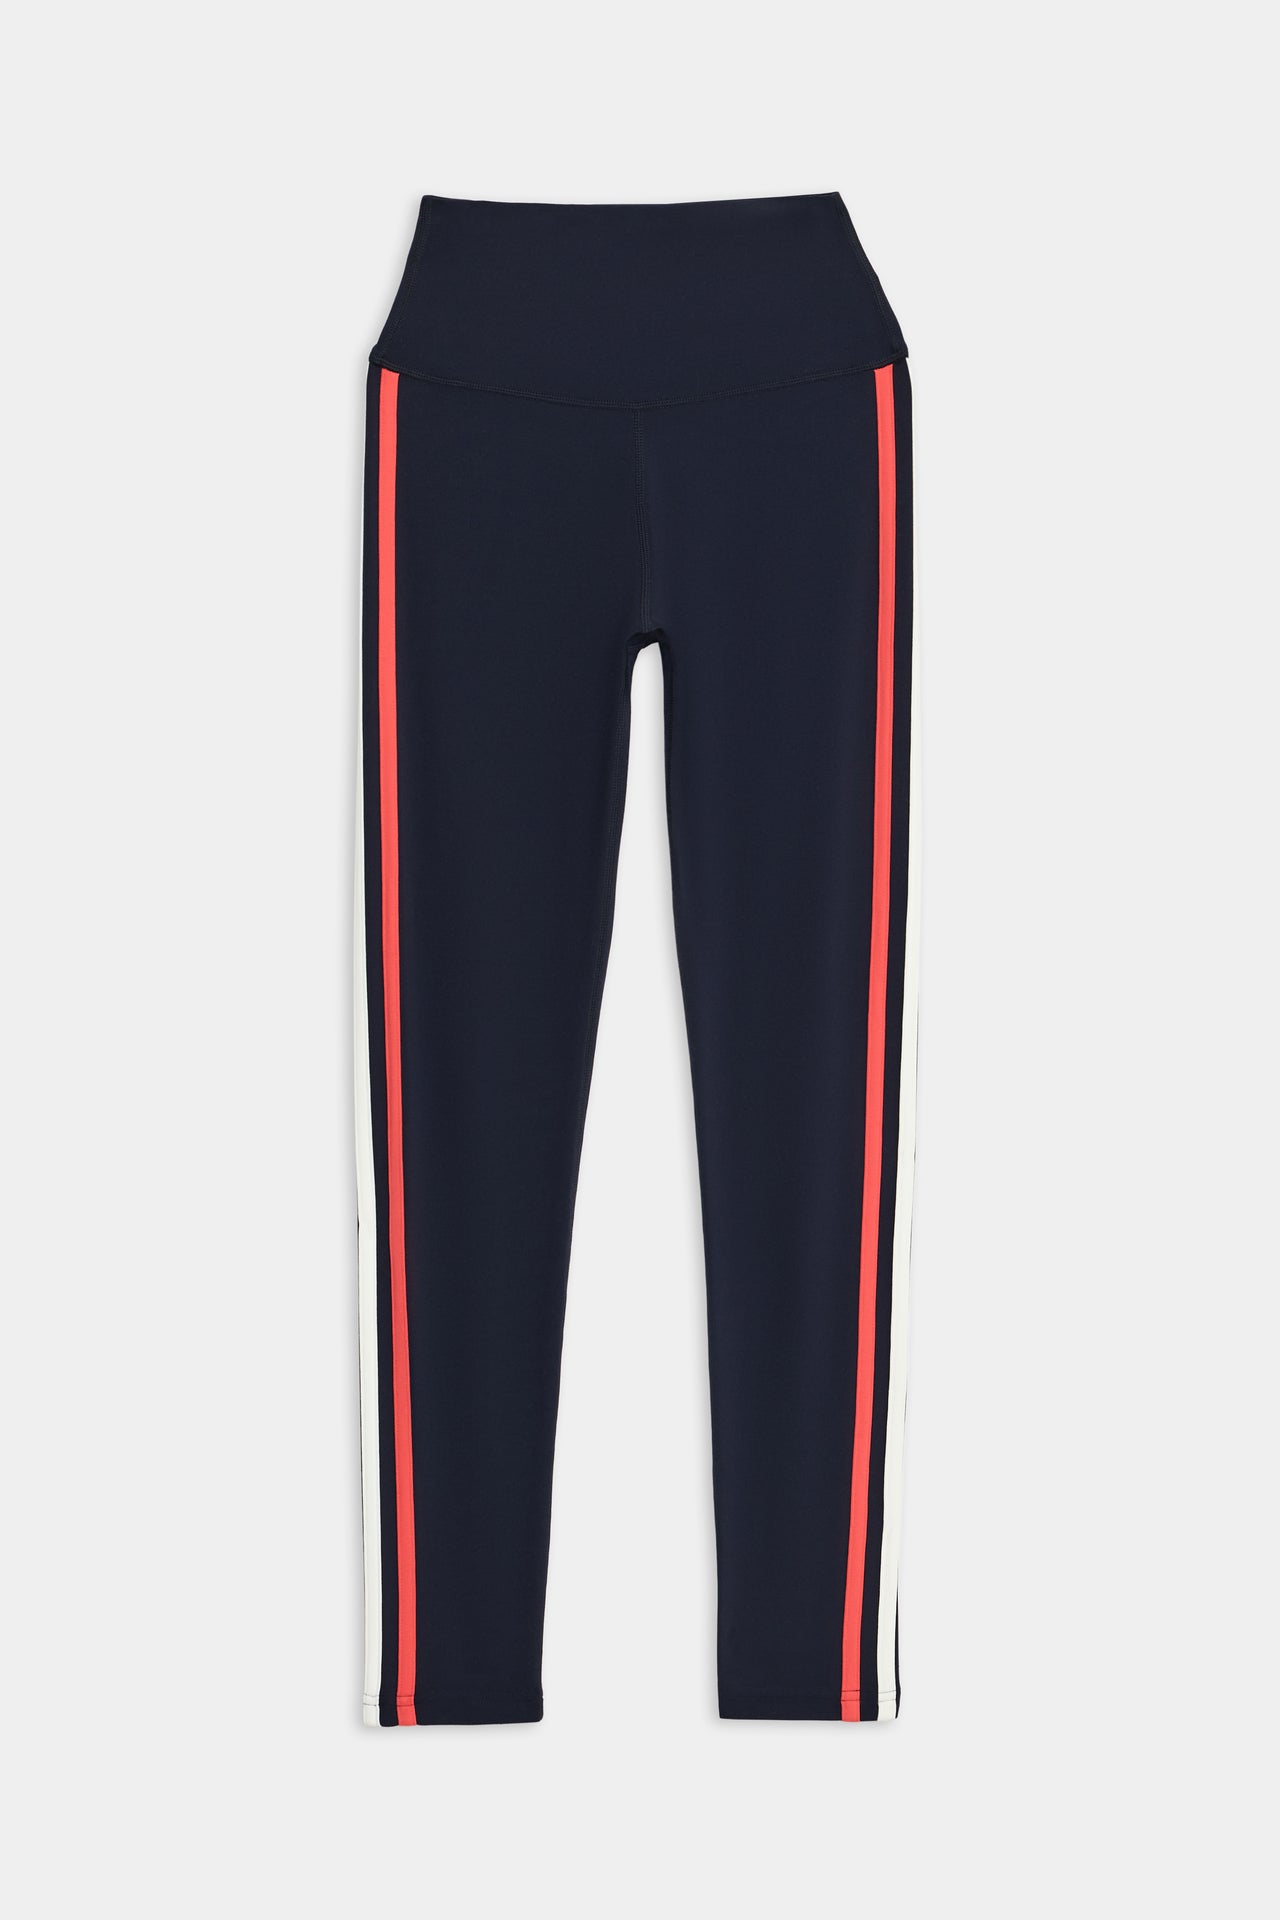 I'm sorry, but you didn't provide a product description for me to analyze. Ella High Waist Airweight 7/8 - Indigo/Melon athletic leggings with side stripes by SPLITS59.